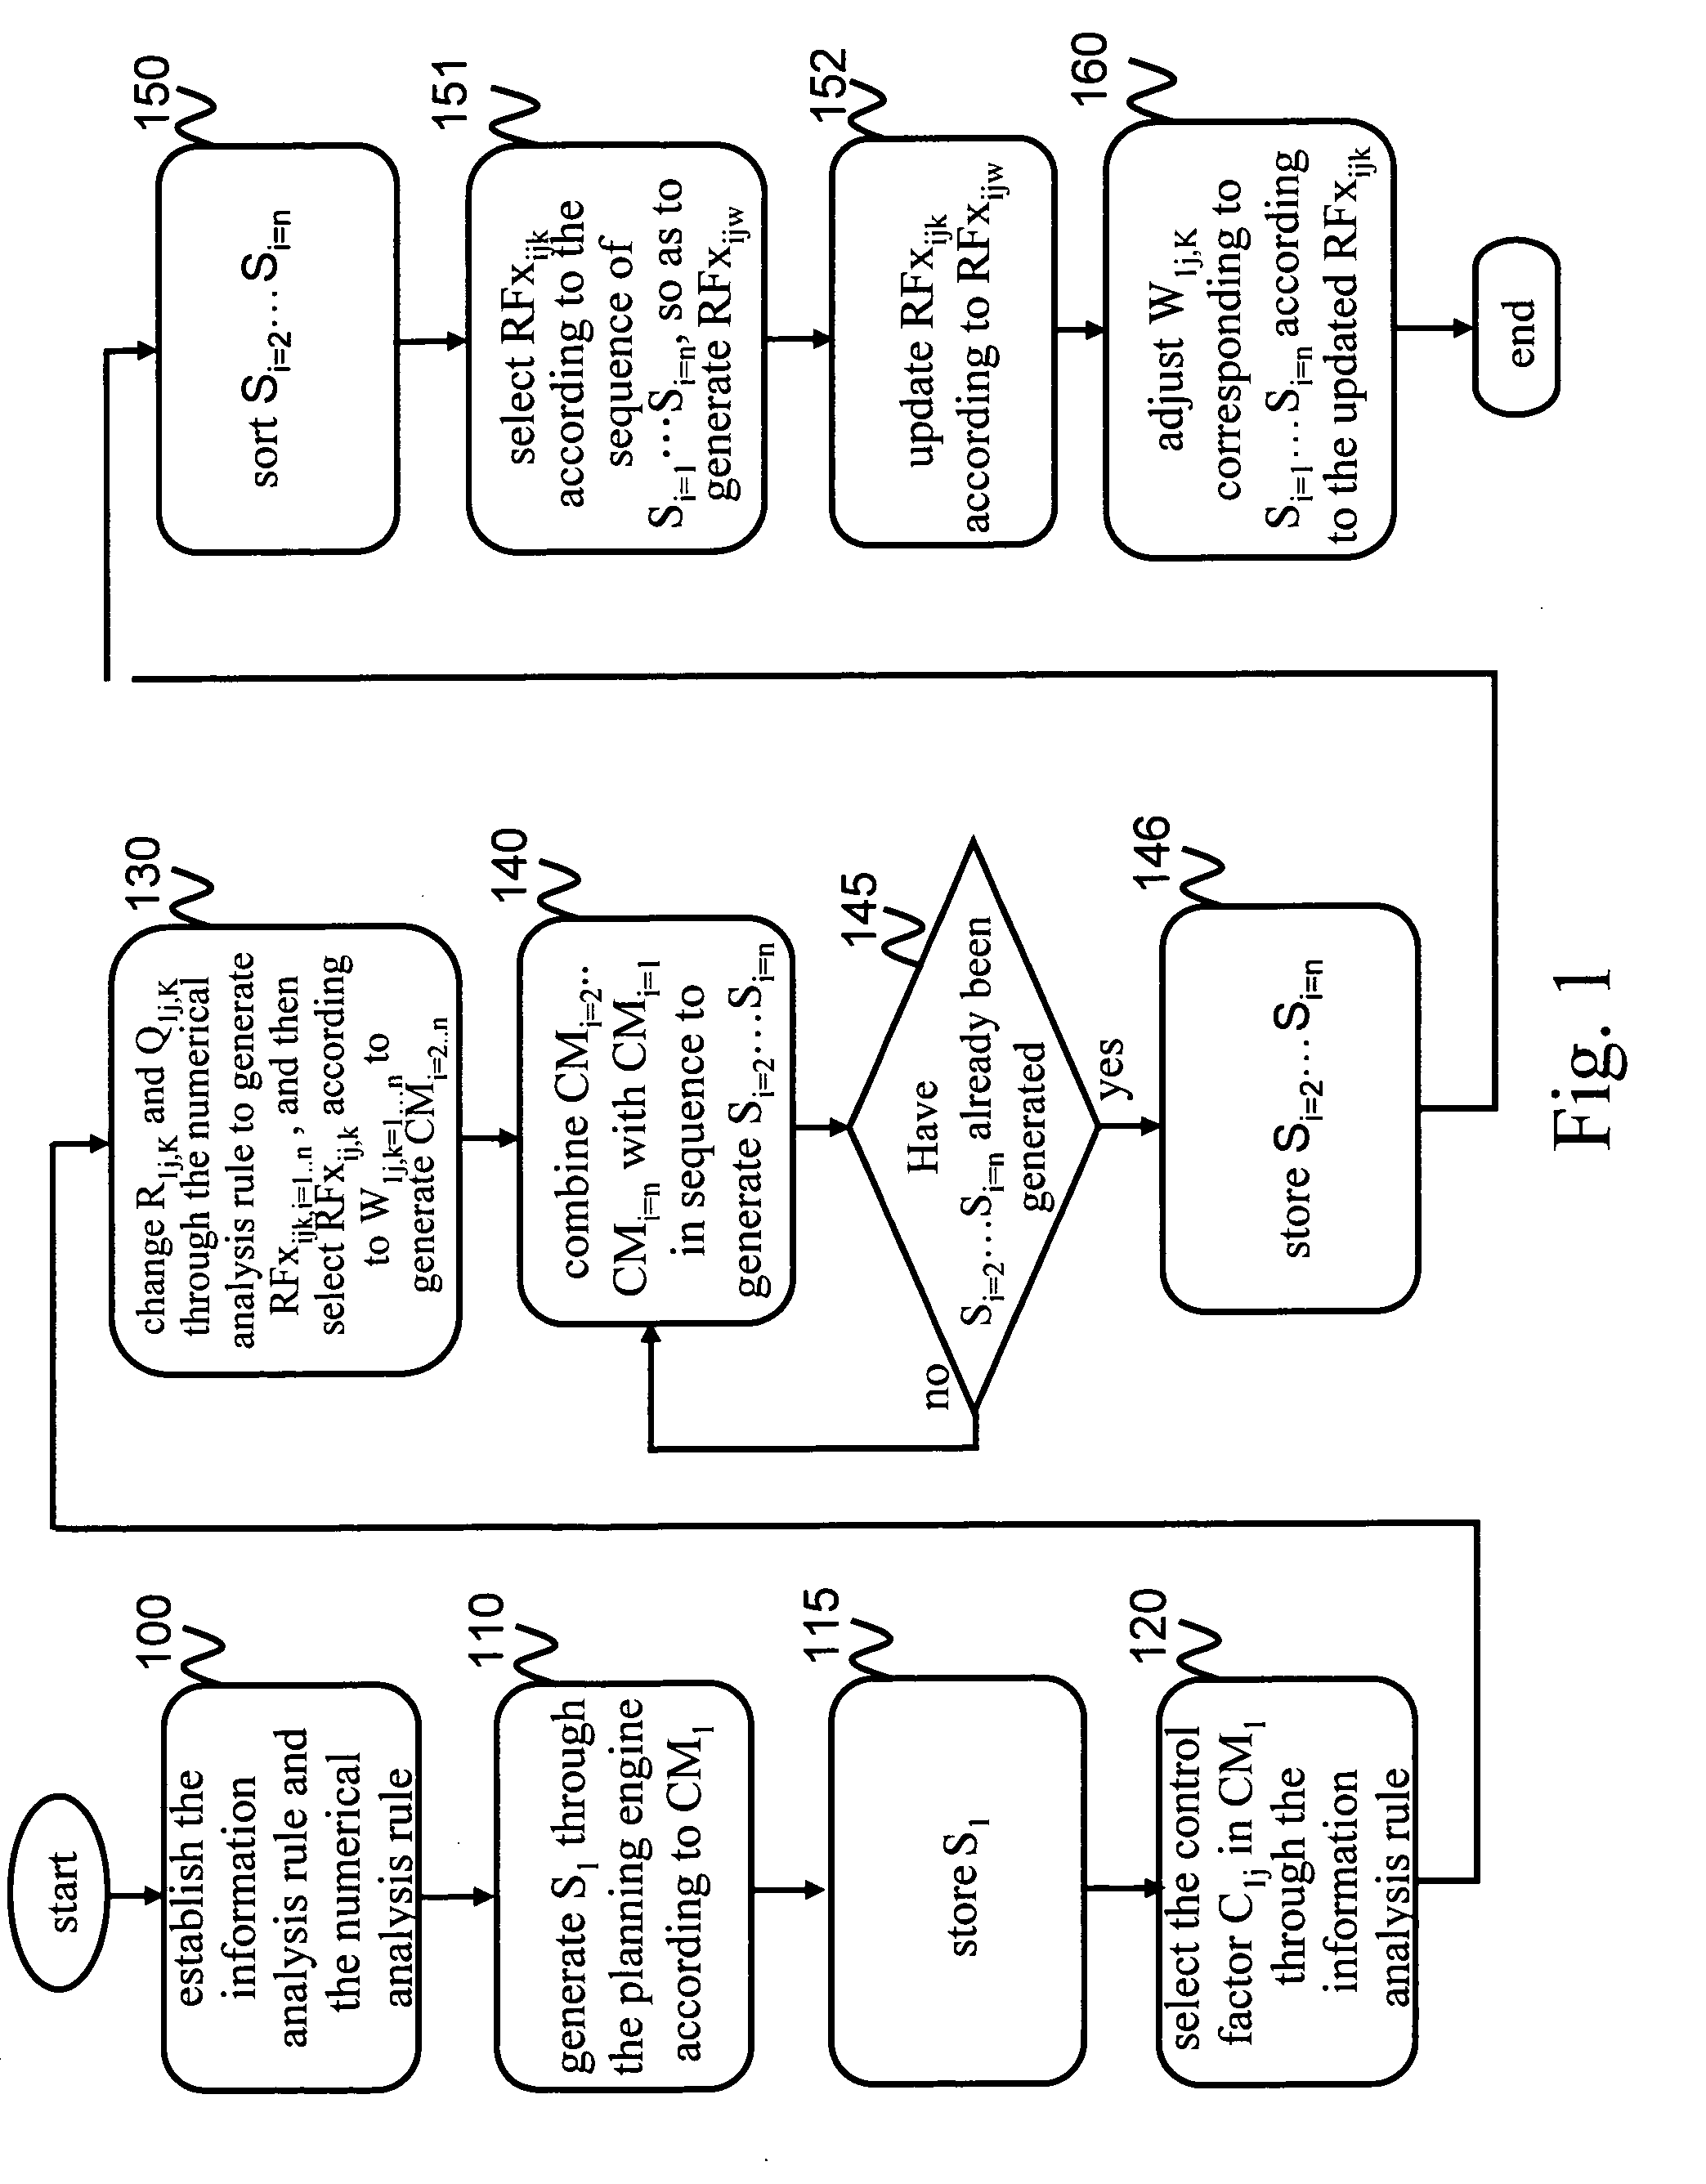 Method and system for generating supply chain planning information